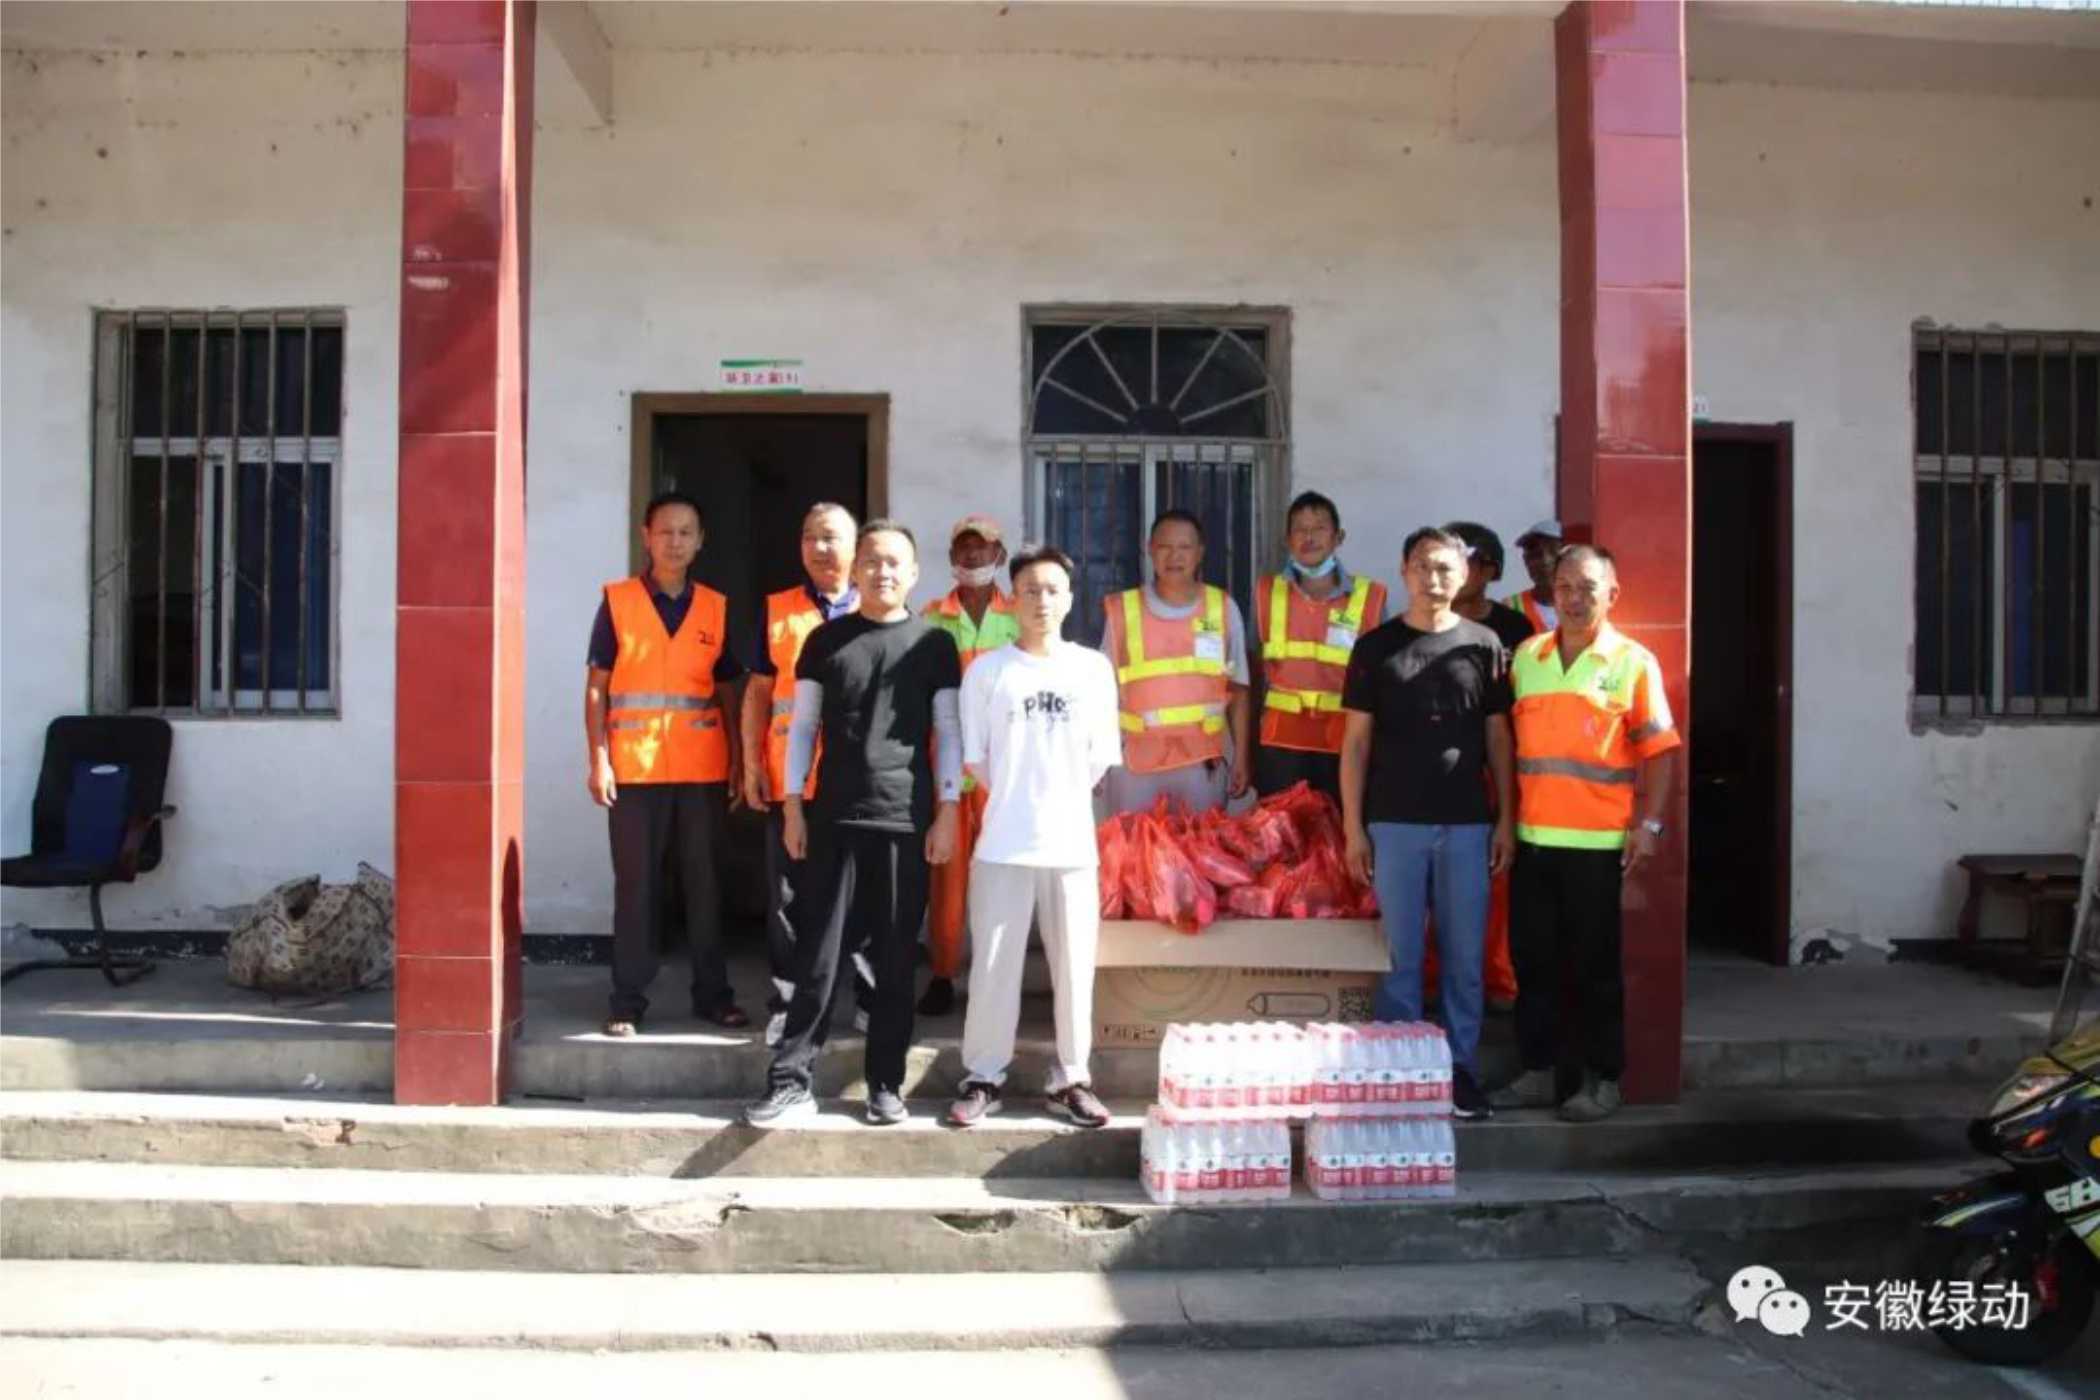 Anhui Clean Energy Co.,Ltd, carried out a "cool-down" activity for frontline sanitation workers in our county